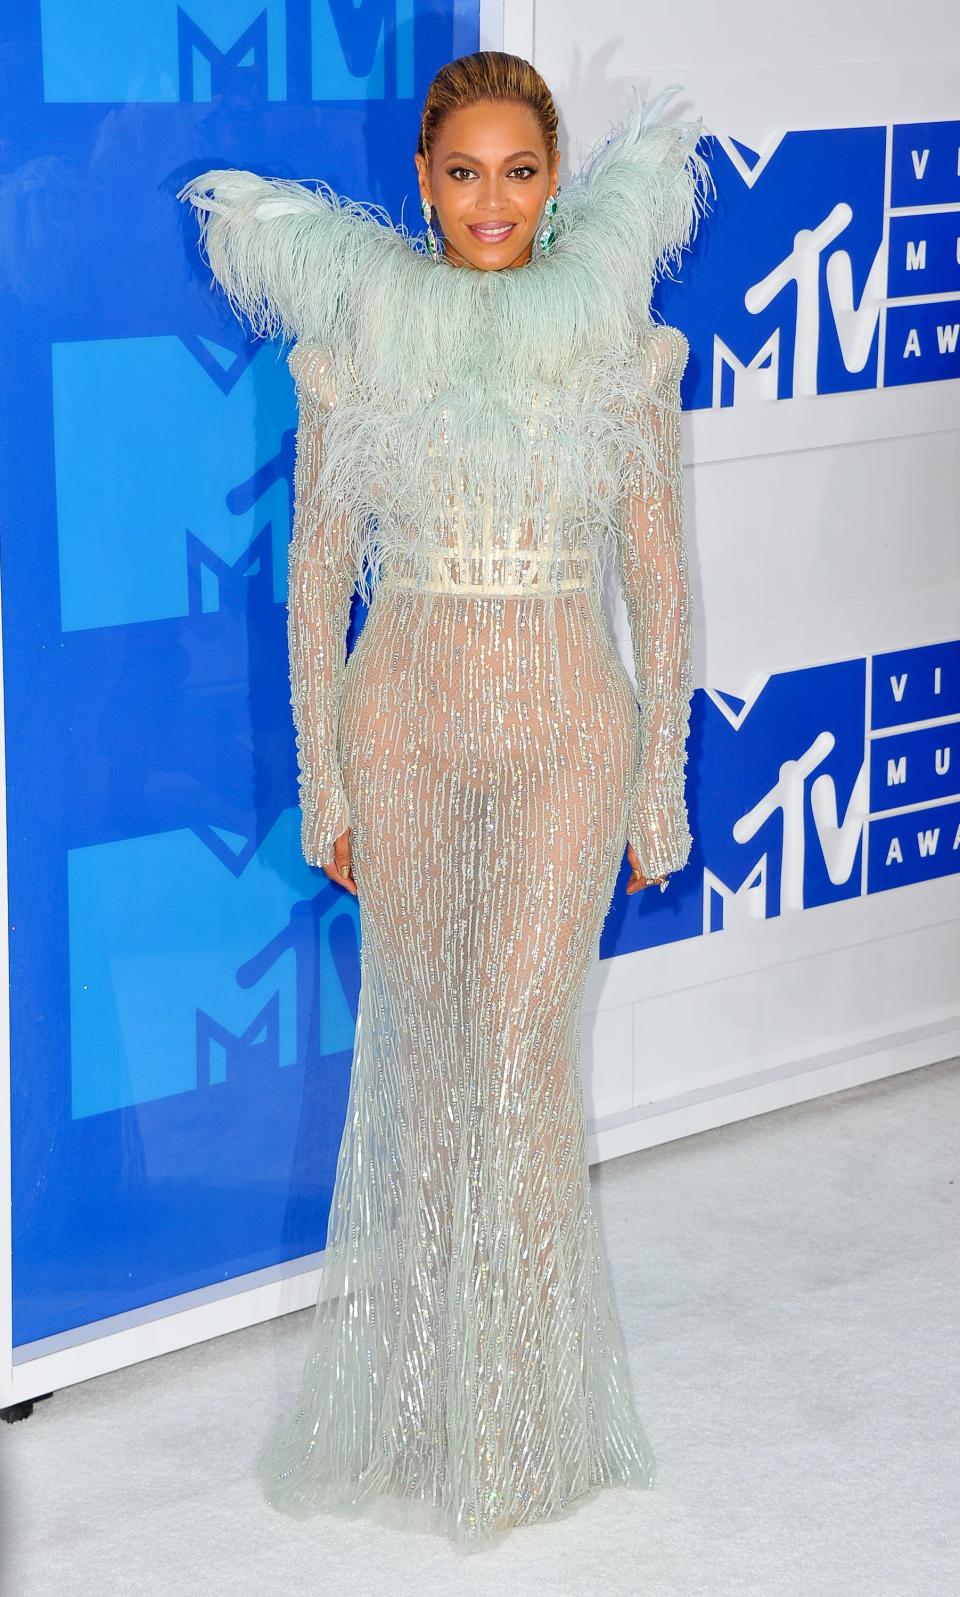 At the MTV VMA's, these stars proved that they know how to make an entrance in grand—and directional fashion.